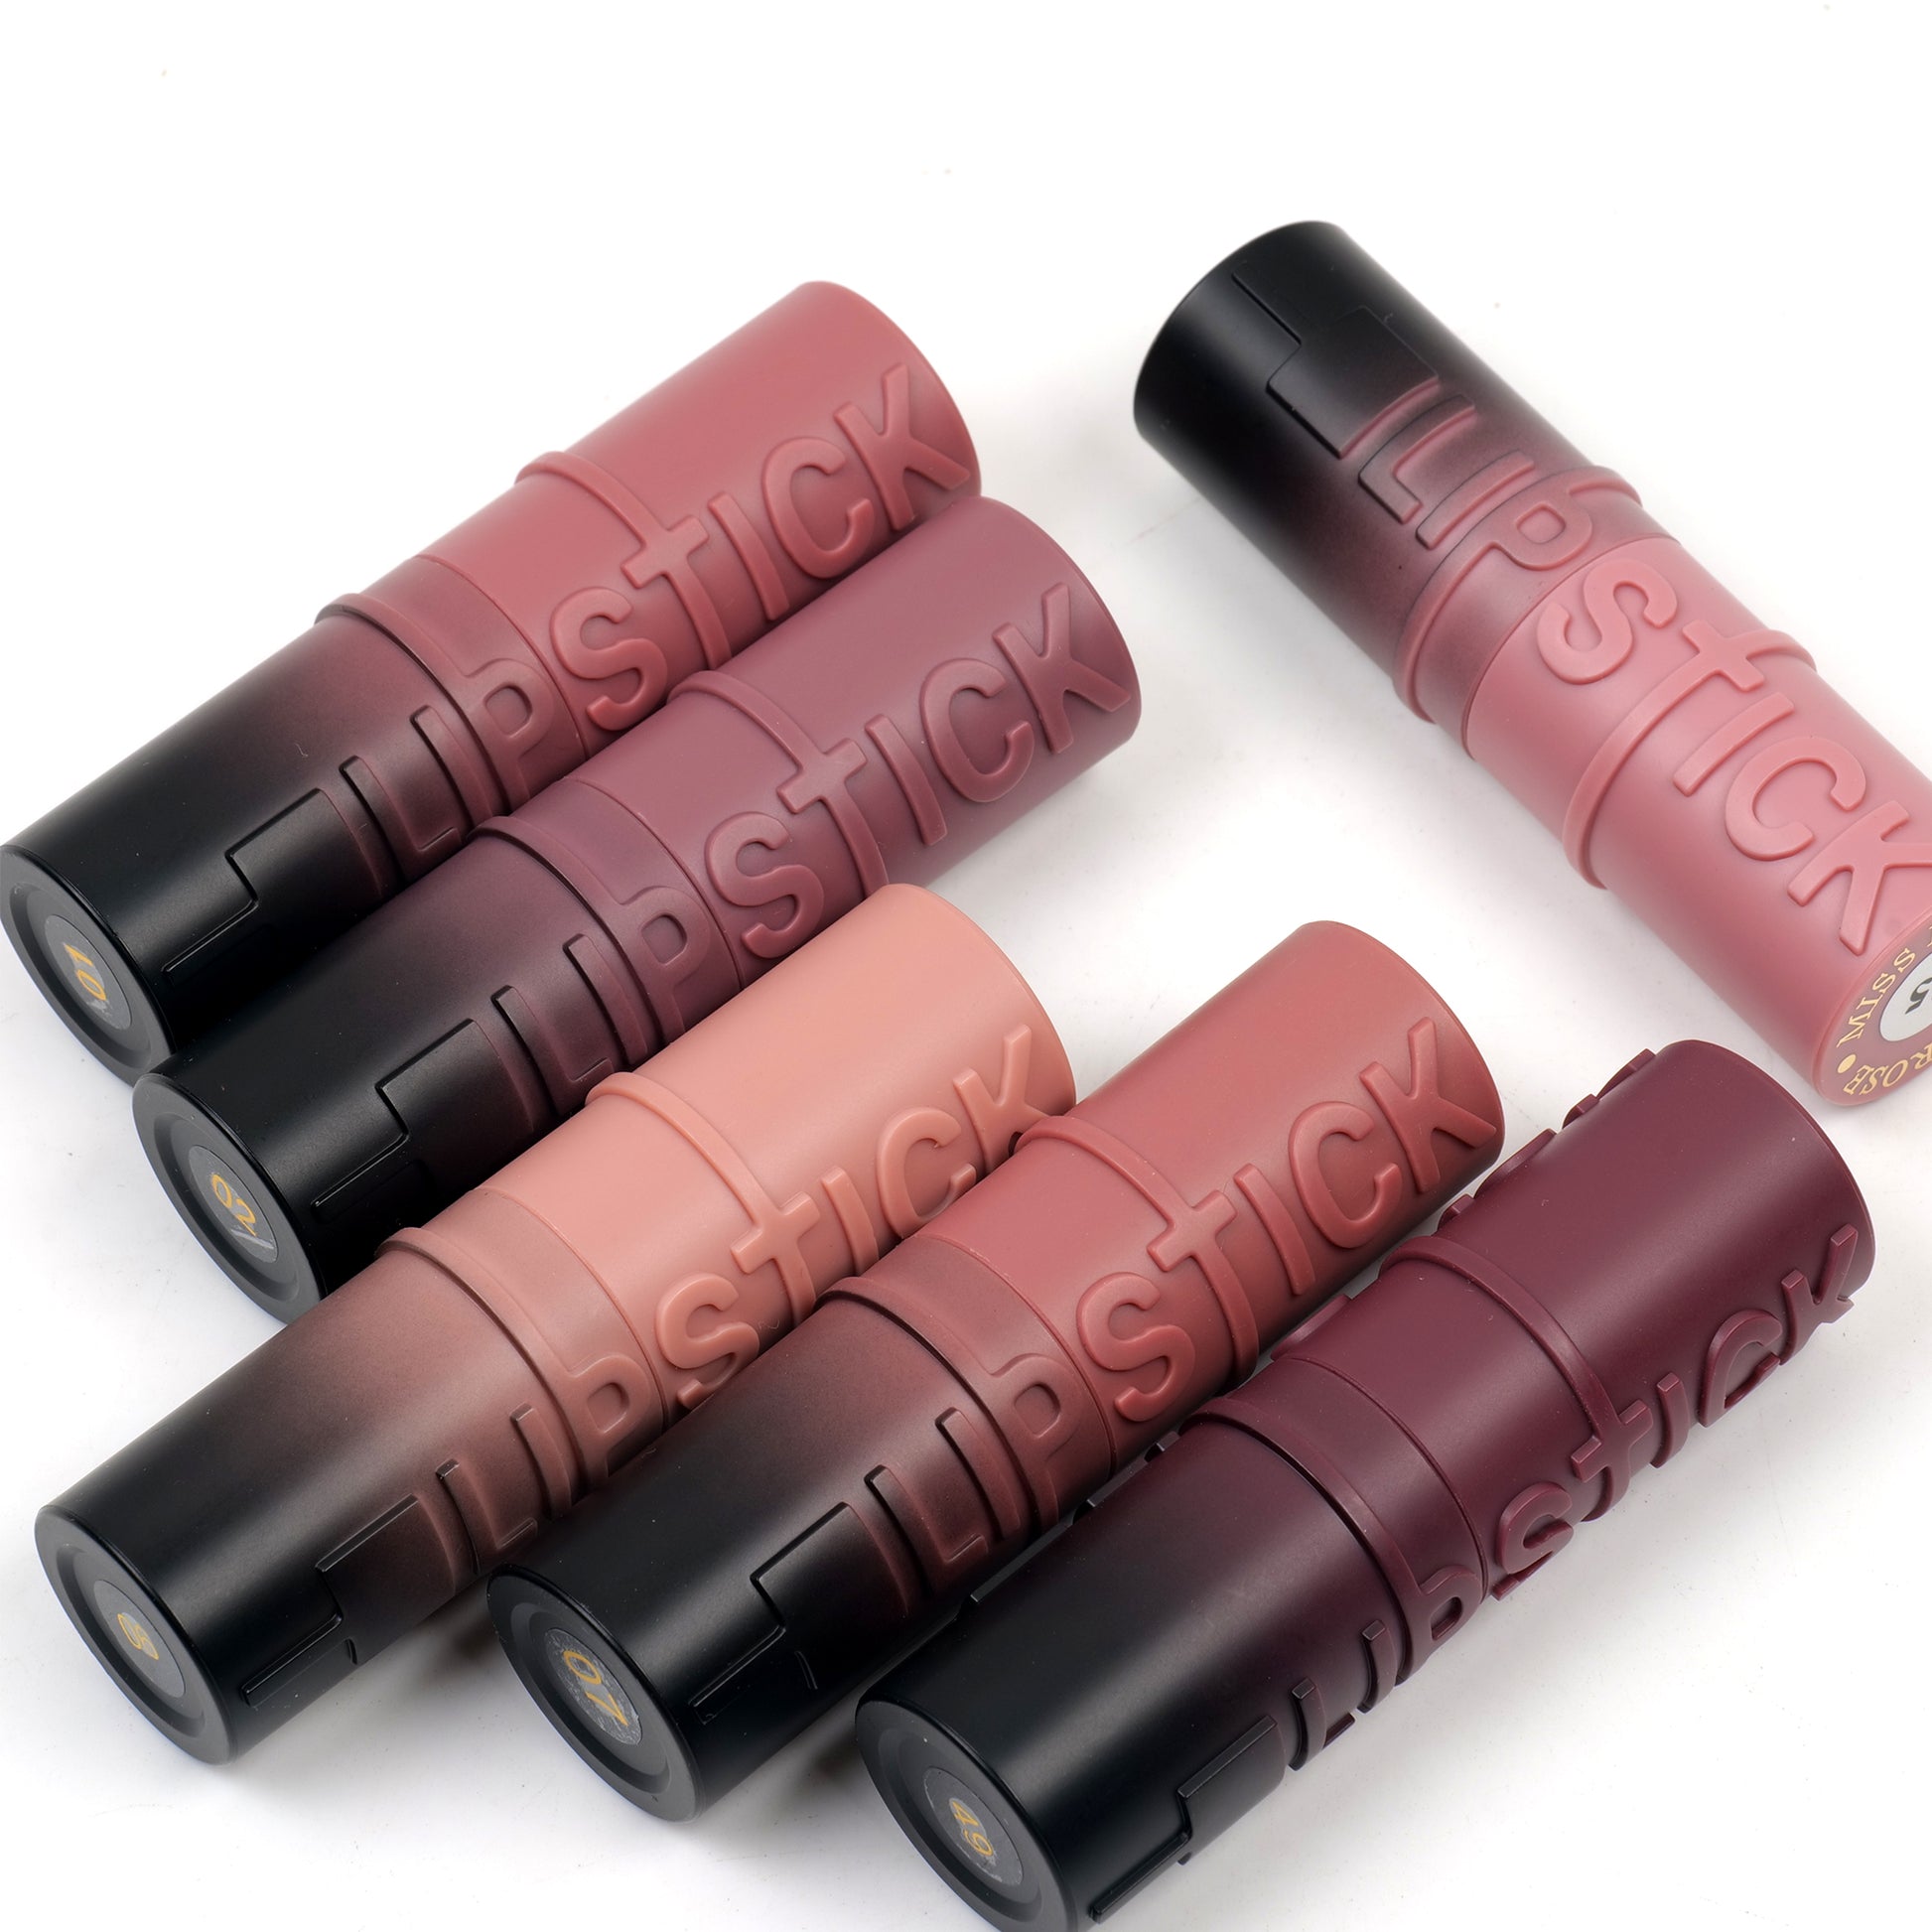 Buy Miss Rose New Classic Pack Of 6 Lipstick in Pakistan